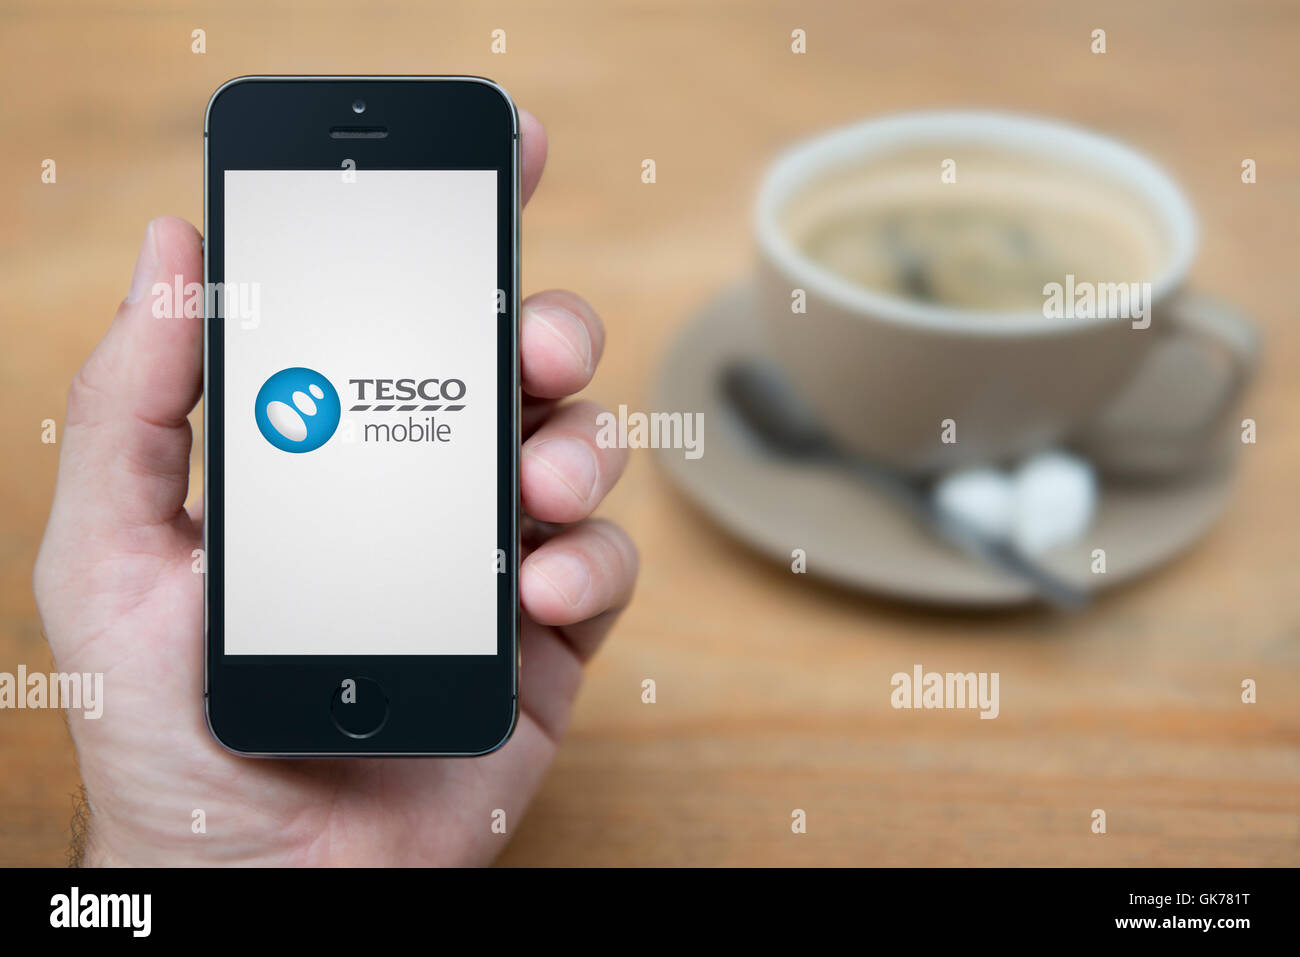 A man looks at his iPhone which displays the Tesco Mobile logo, while sat with a cup of coffee (Editorial use only). Stock Photo